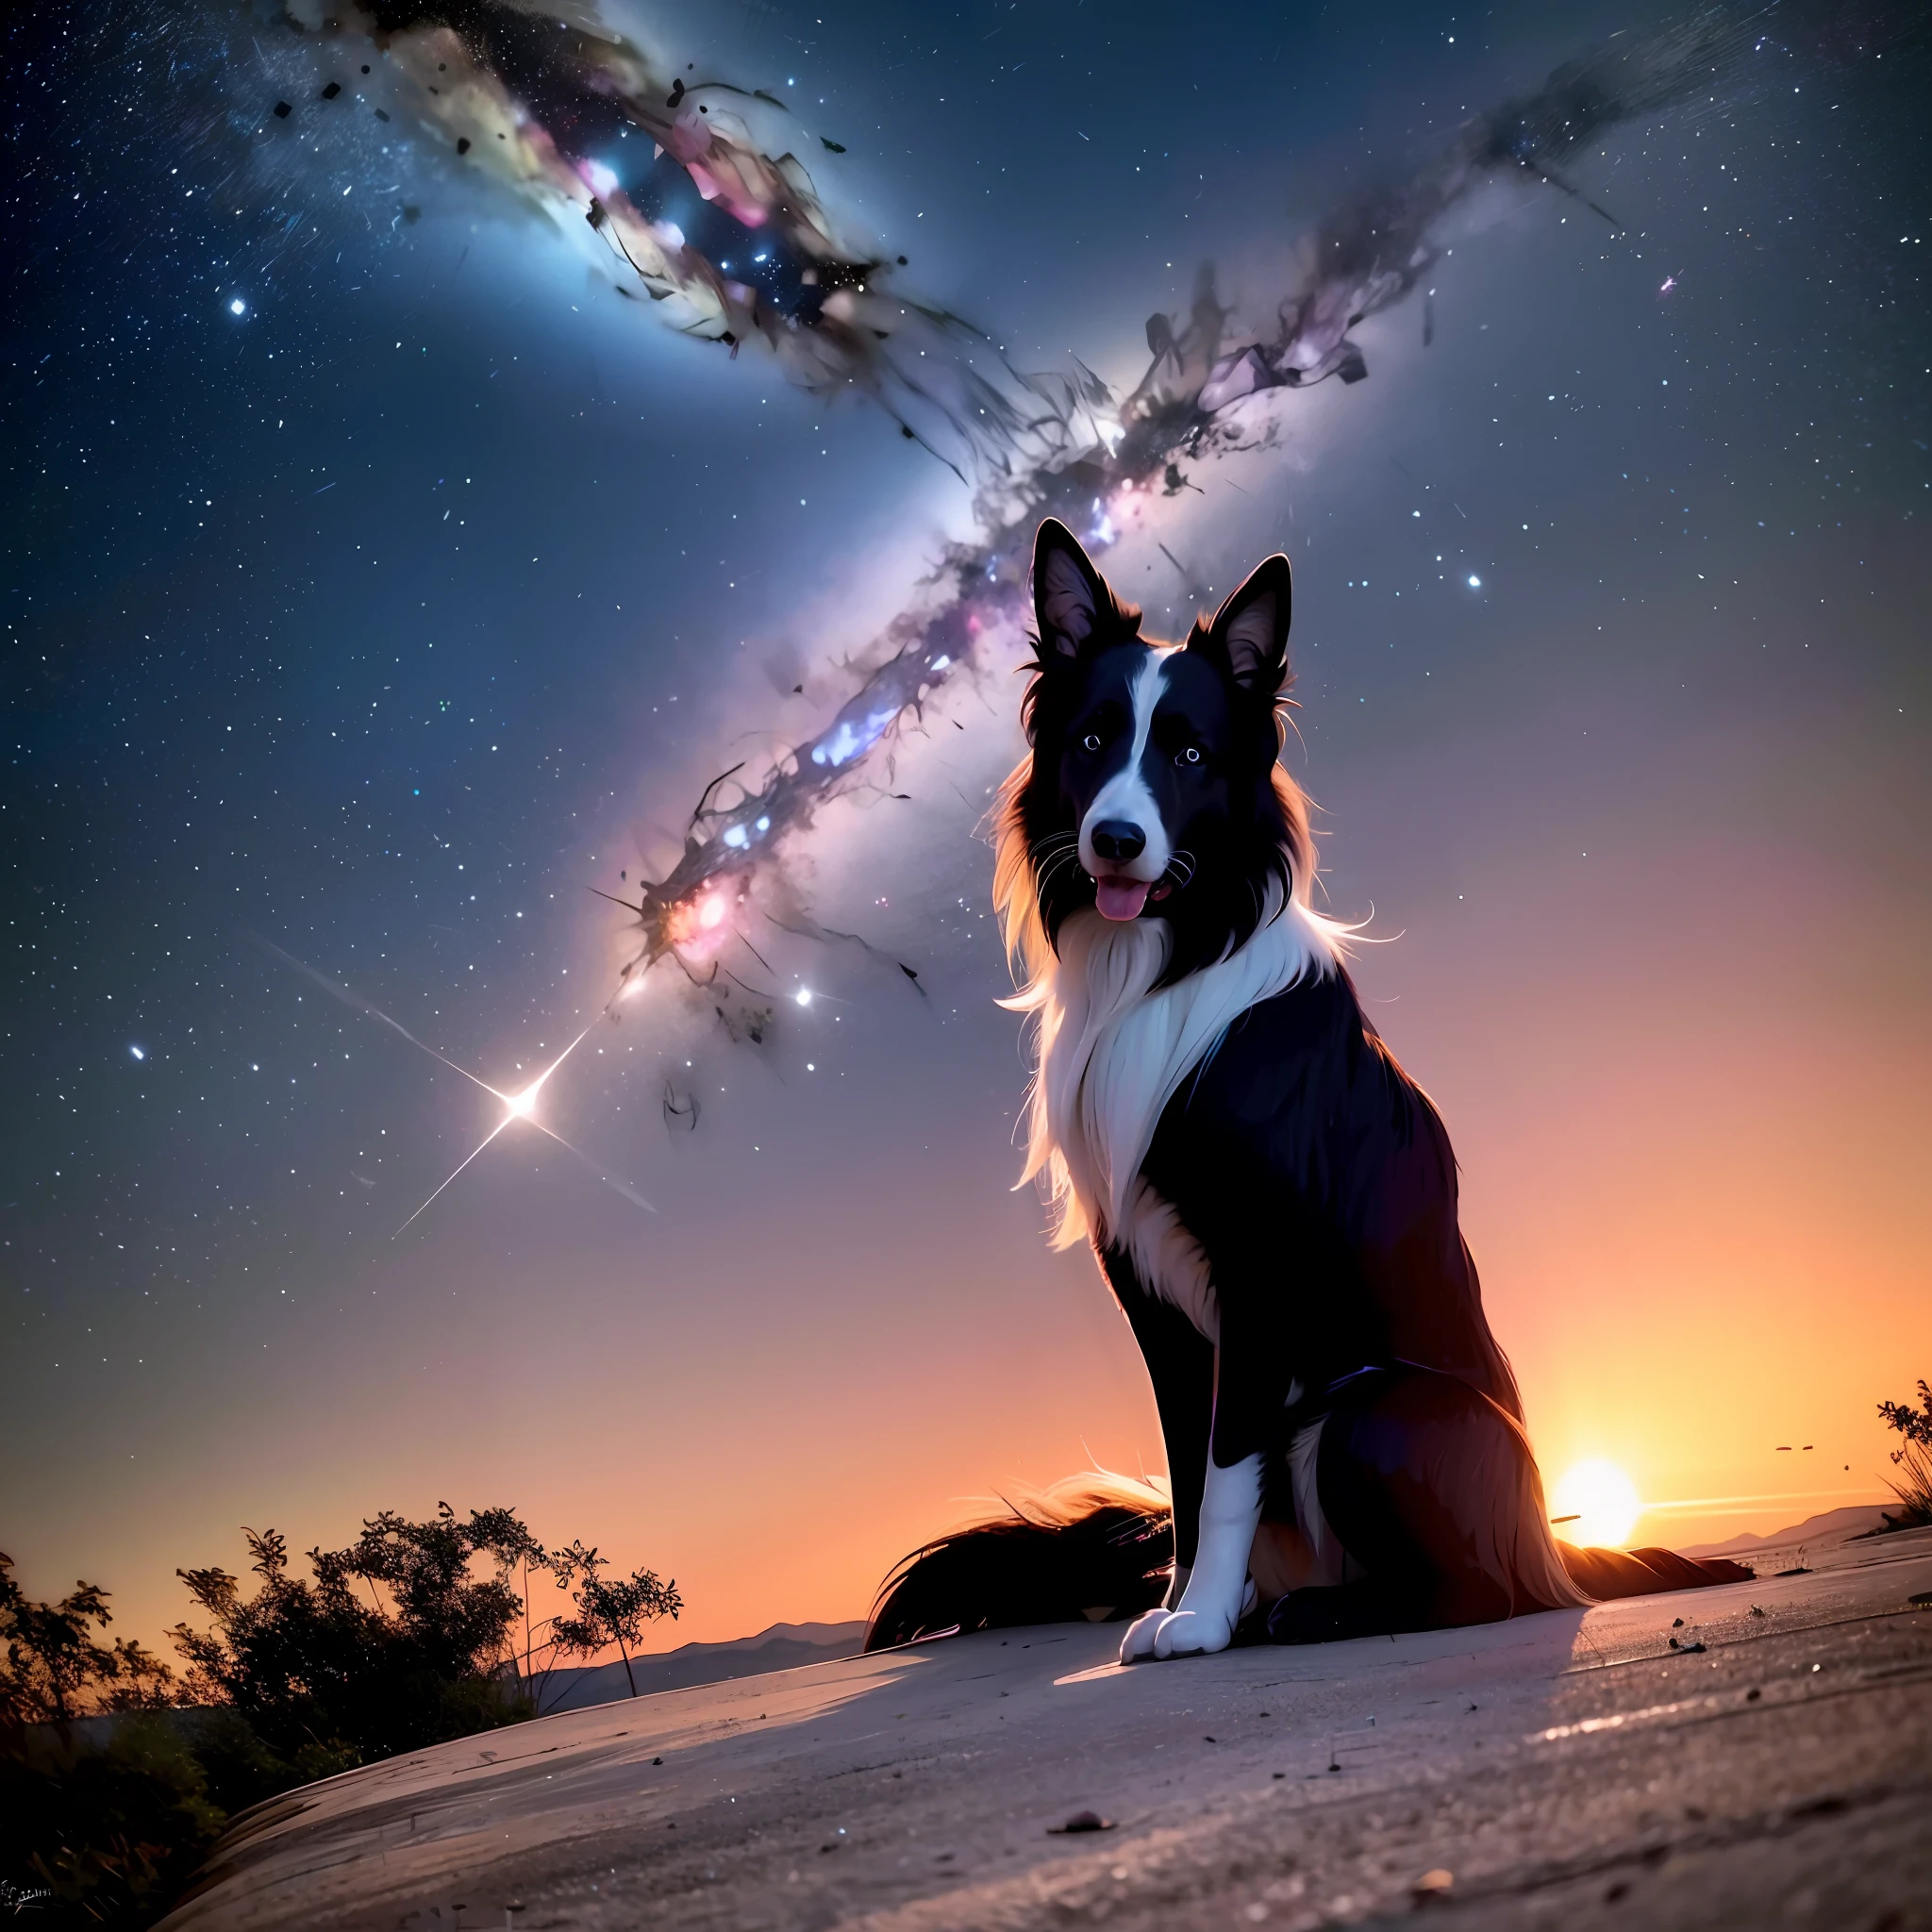 masterpiece, best quality, 8K, colorful, realistic, HDR, high detail, wallpaper, border collie, spacesuit, spaceship, window, nebula, full body